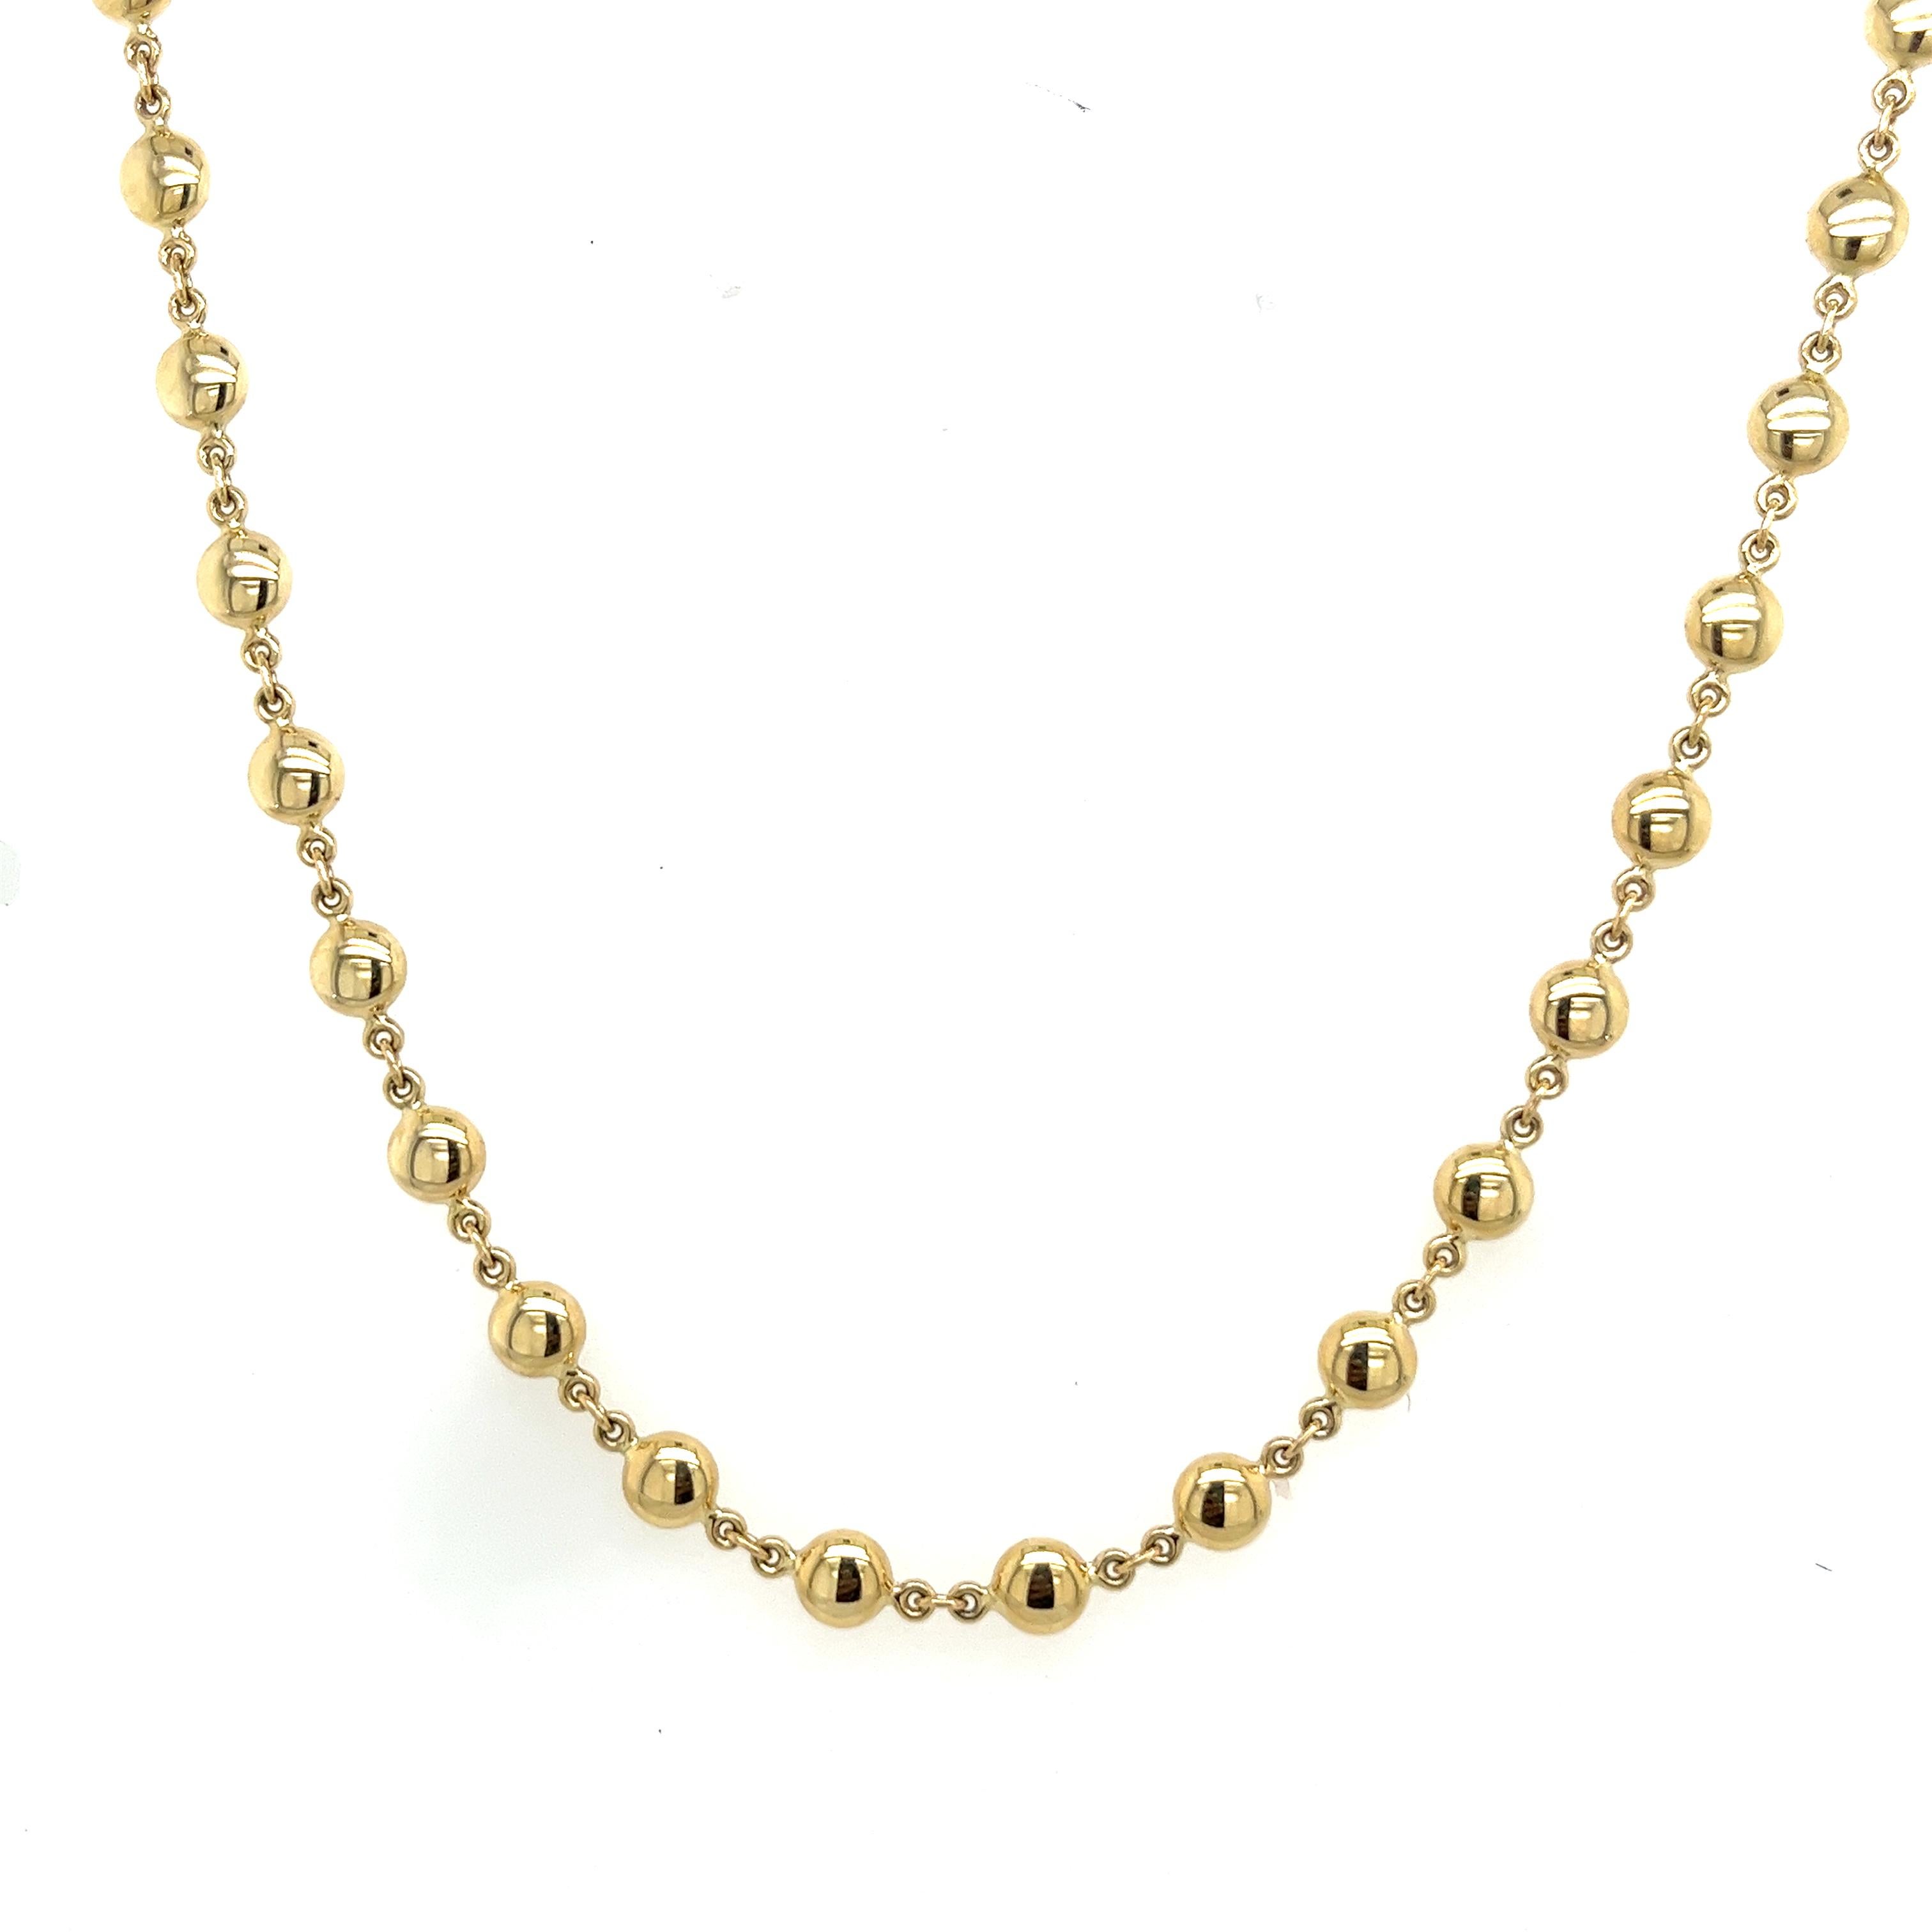 Women's Solid 14ct Yellow Gold Italian Ball Bead Chain Classic Necklace 18